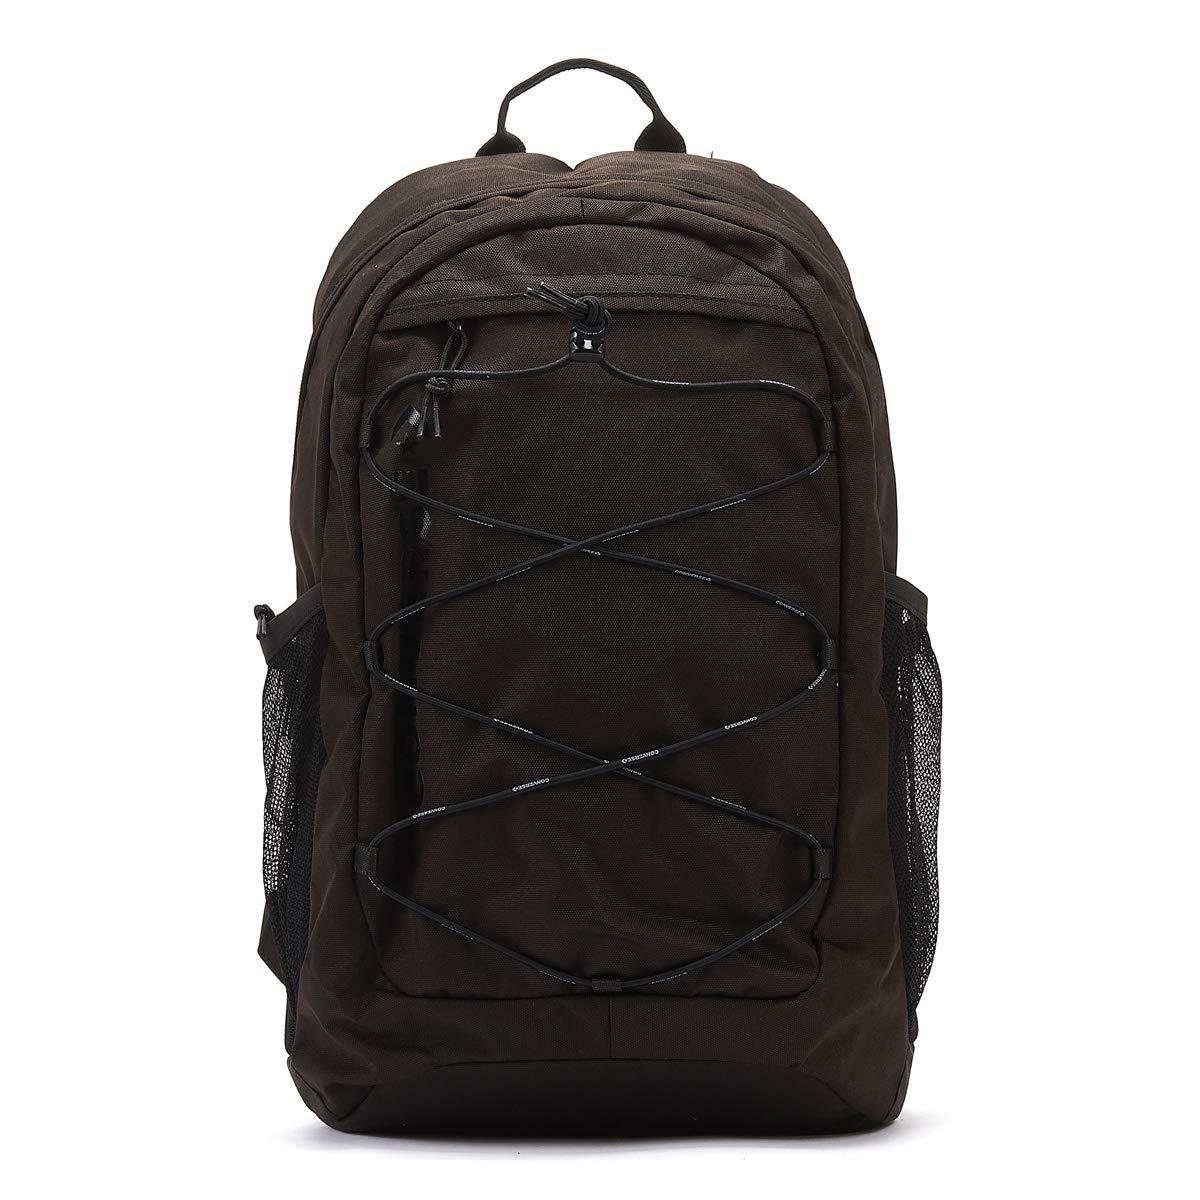 Converse Backpack in Black for Men - Lyst